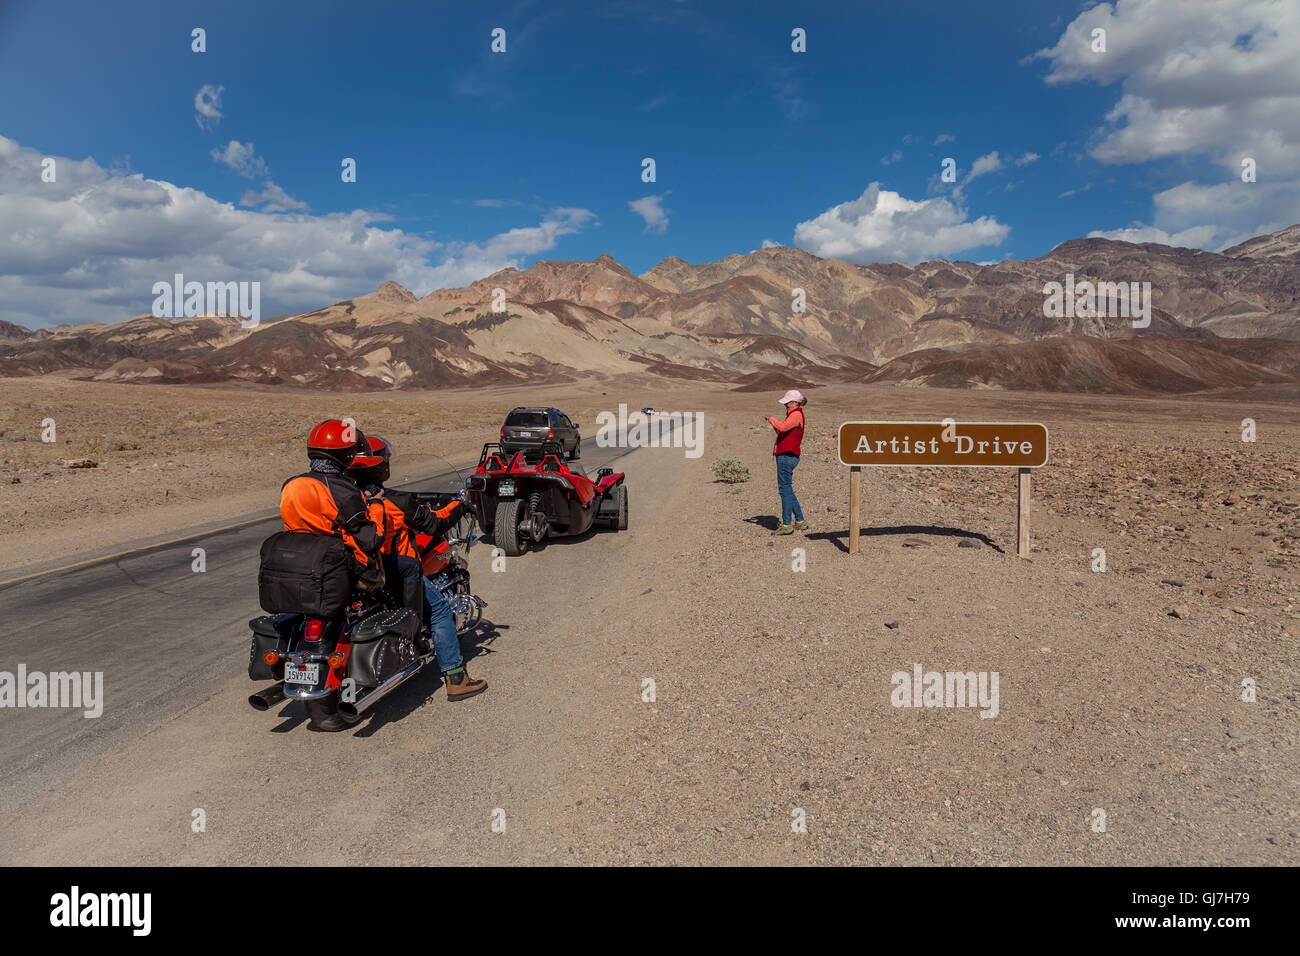 Motorcyclists riding on Artist Drive, Death Valley National Park, California, USA Stock Photo